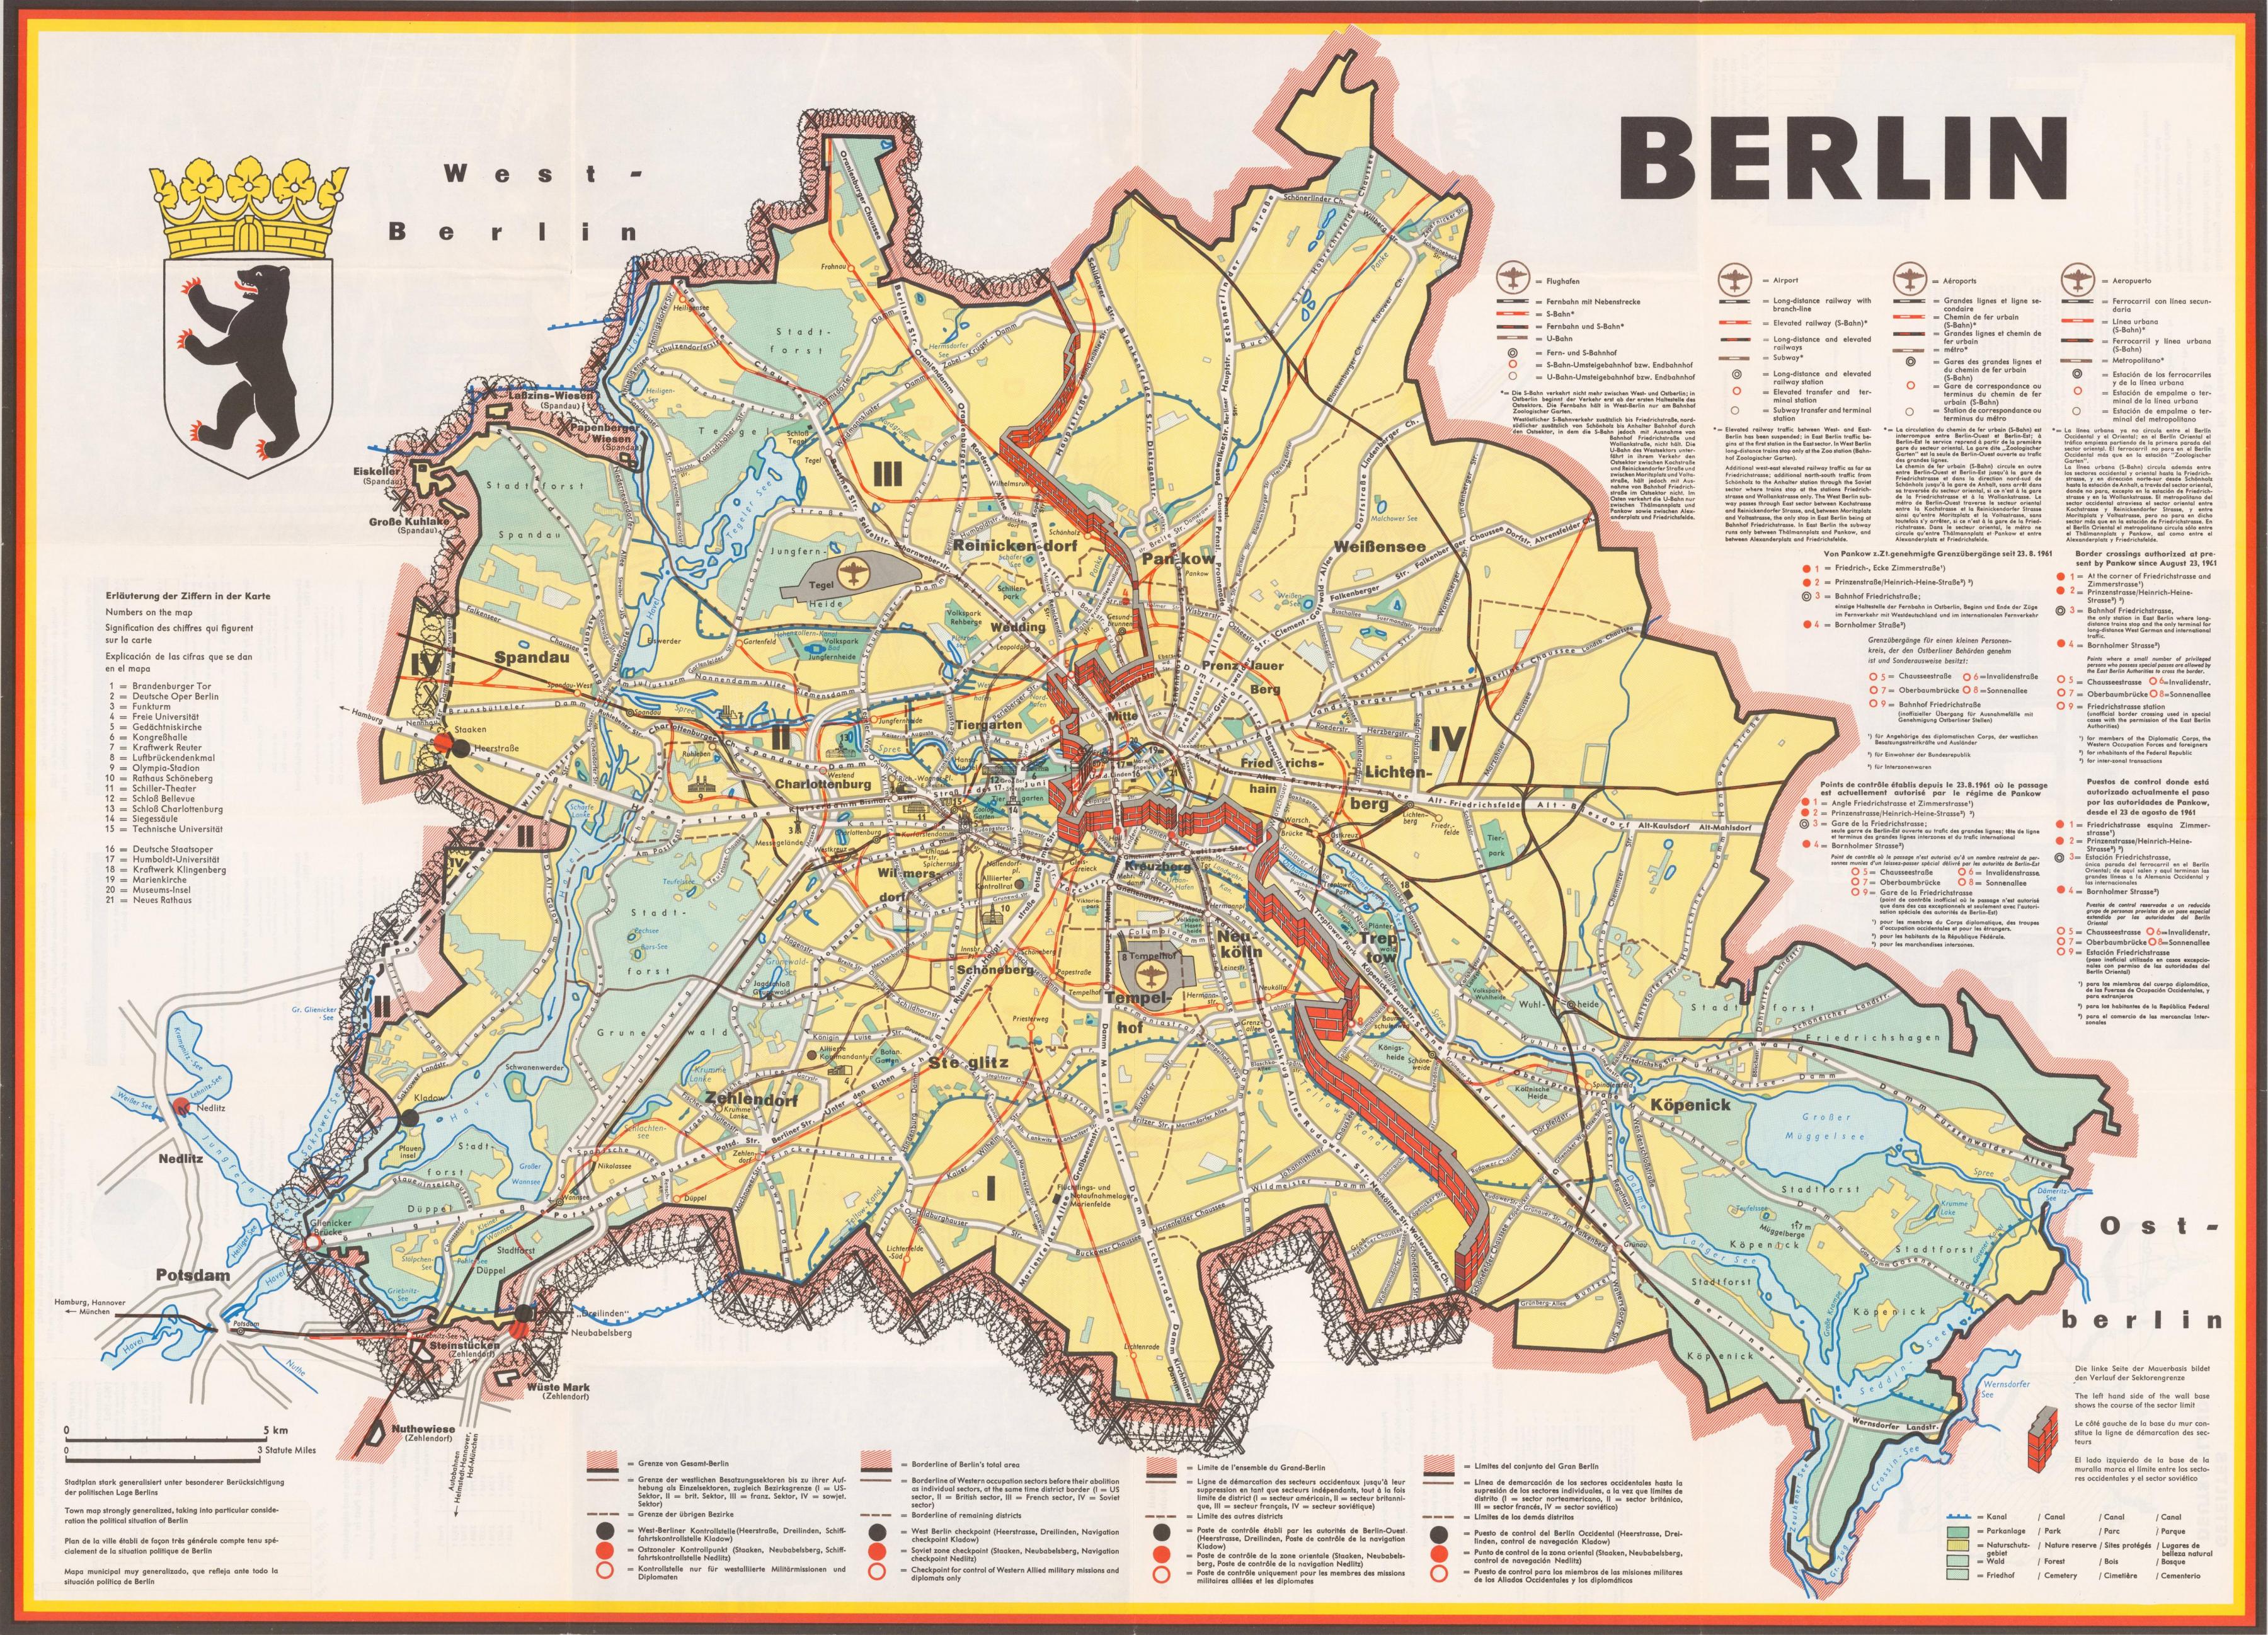 Germany Biggest Wall Map Largest Wall Maps Of The World | Images and ...